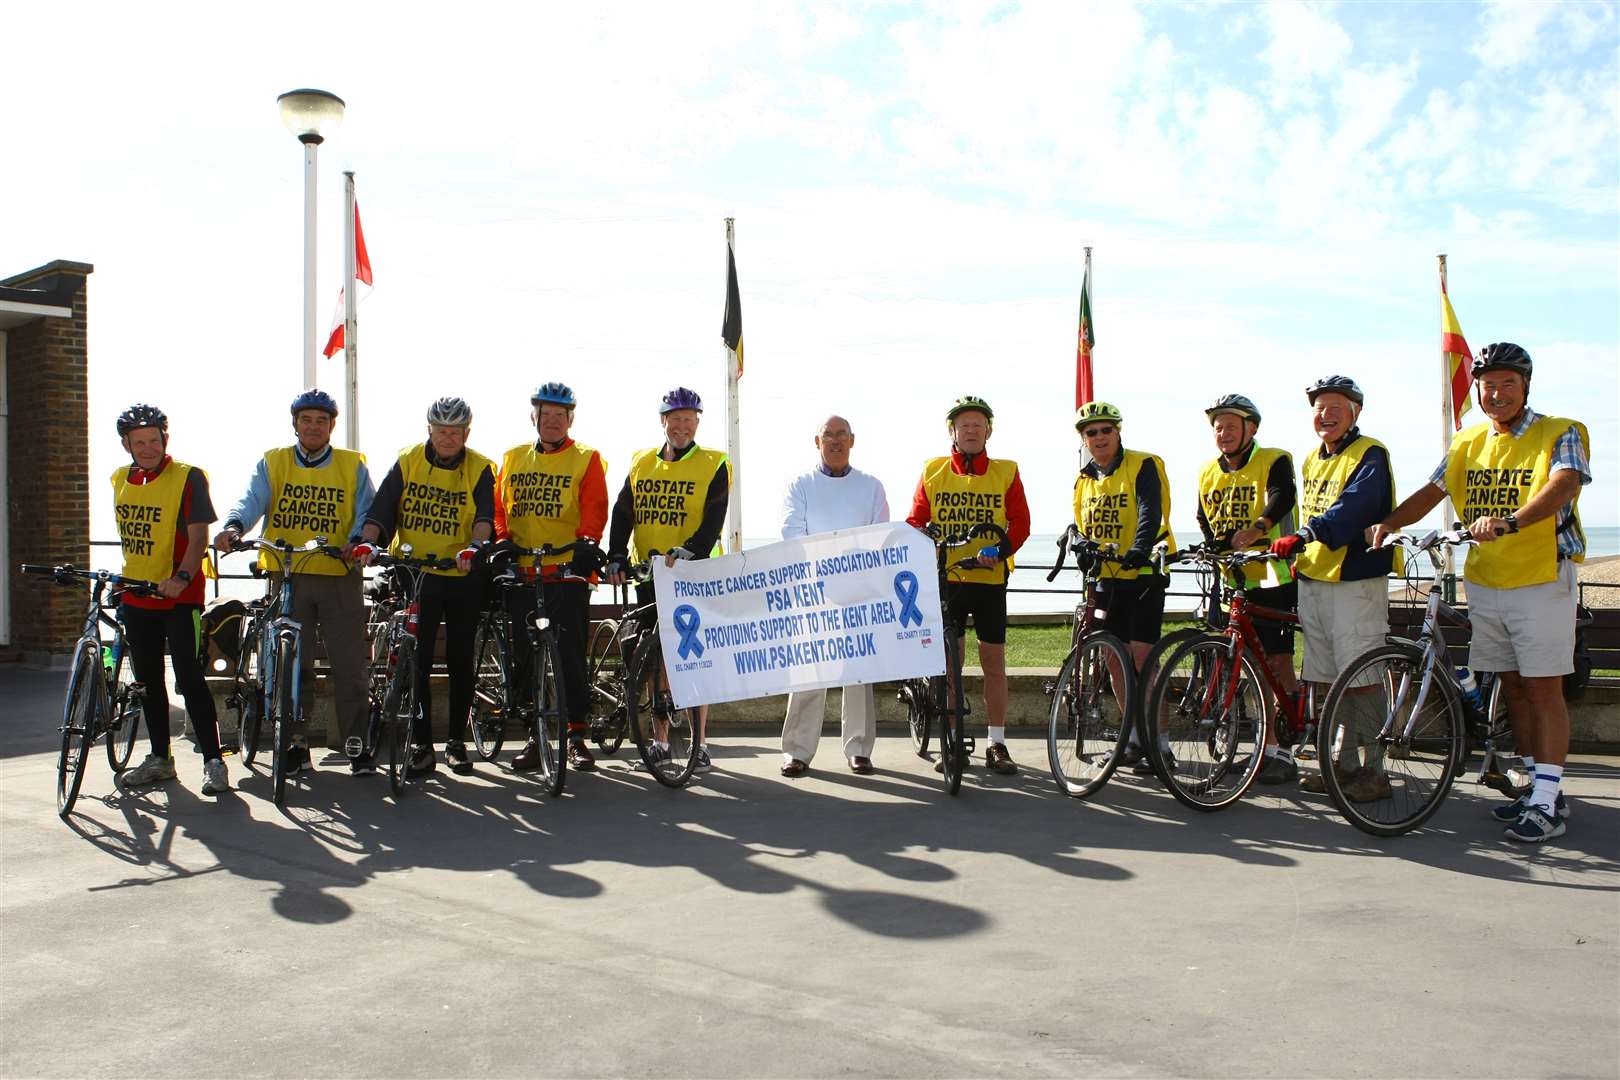 Tuesday Tour's gear up for cycle ride for PSA Kent